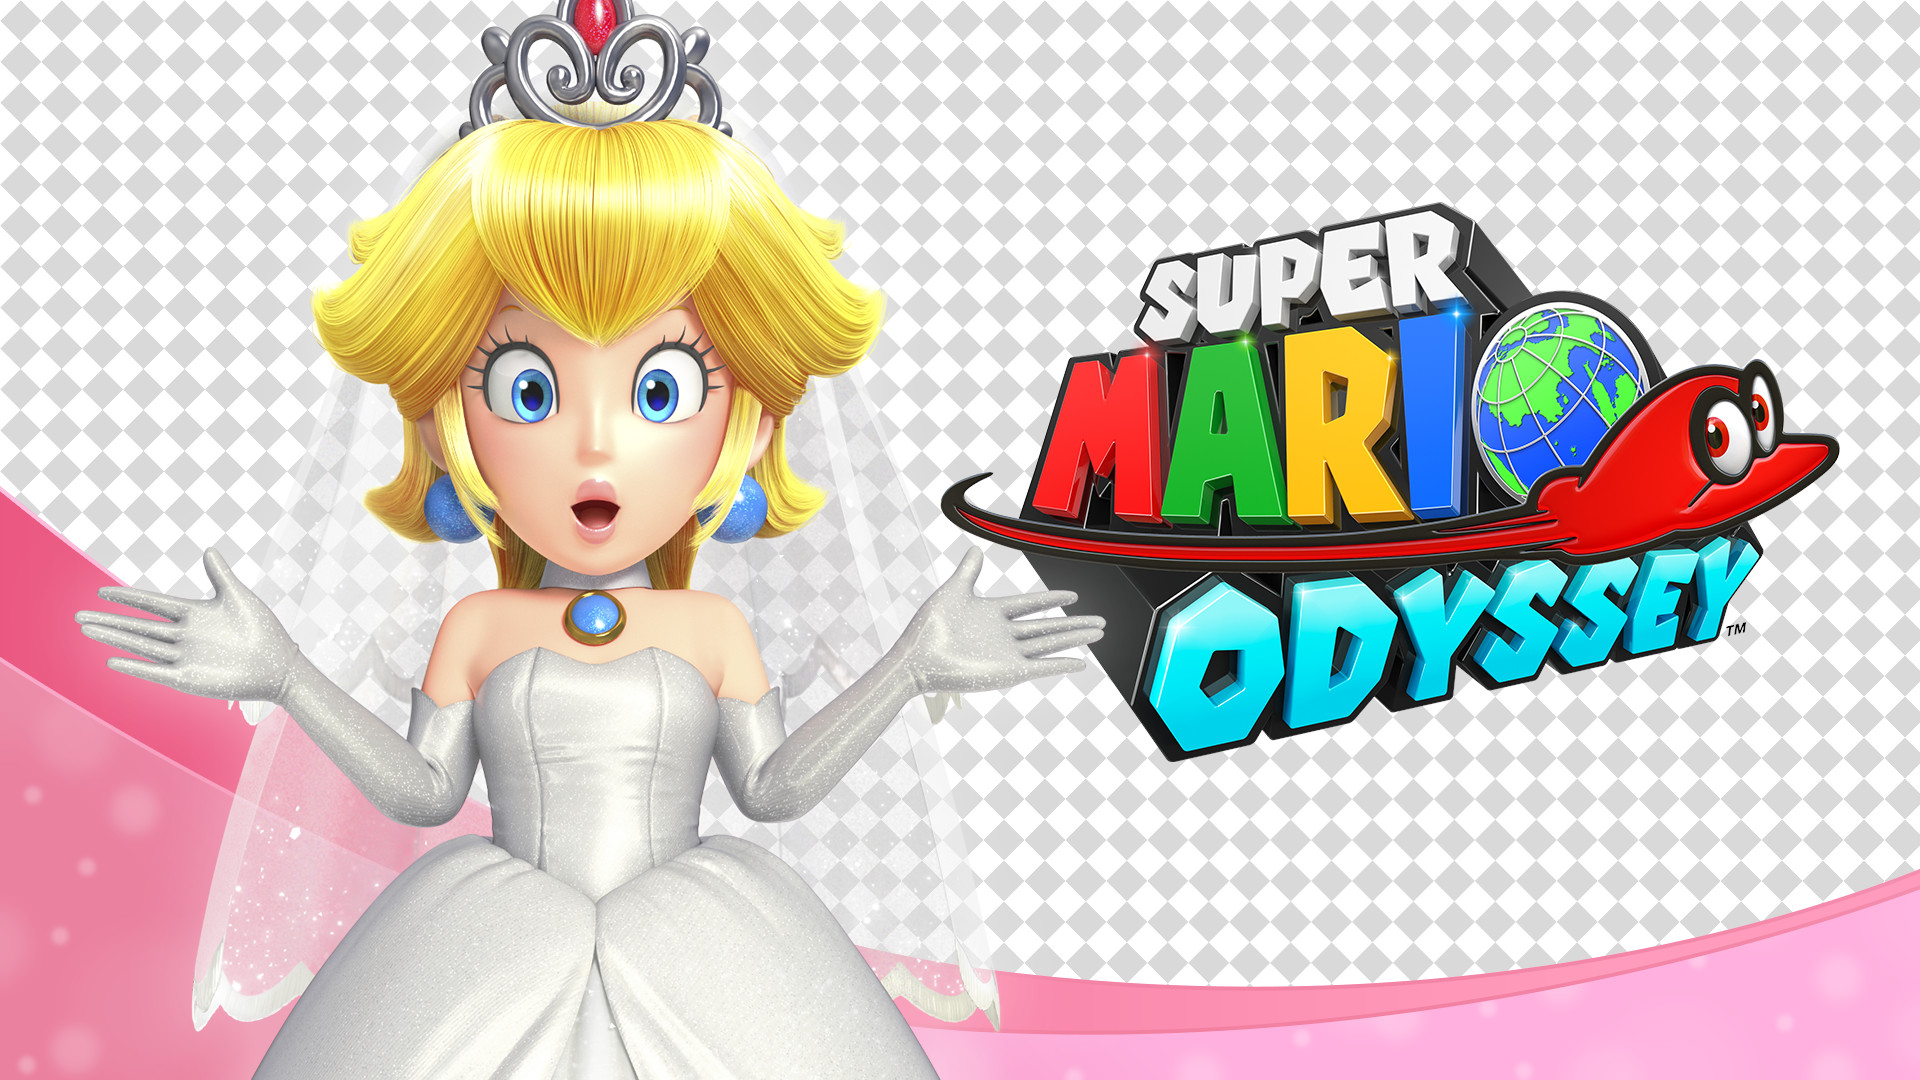 1920x1080 KatLime 32 0 [Wallpaper] Princess Peach, Soon-to-Wed() by MaxiGamer